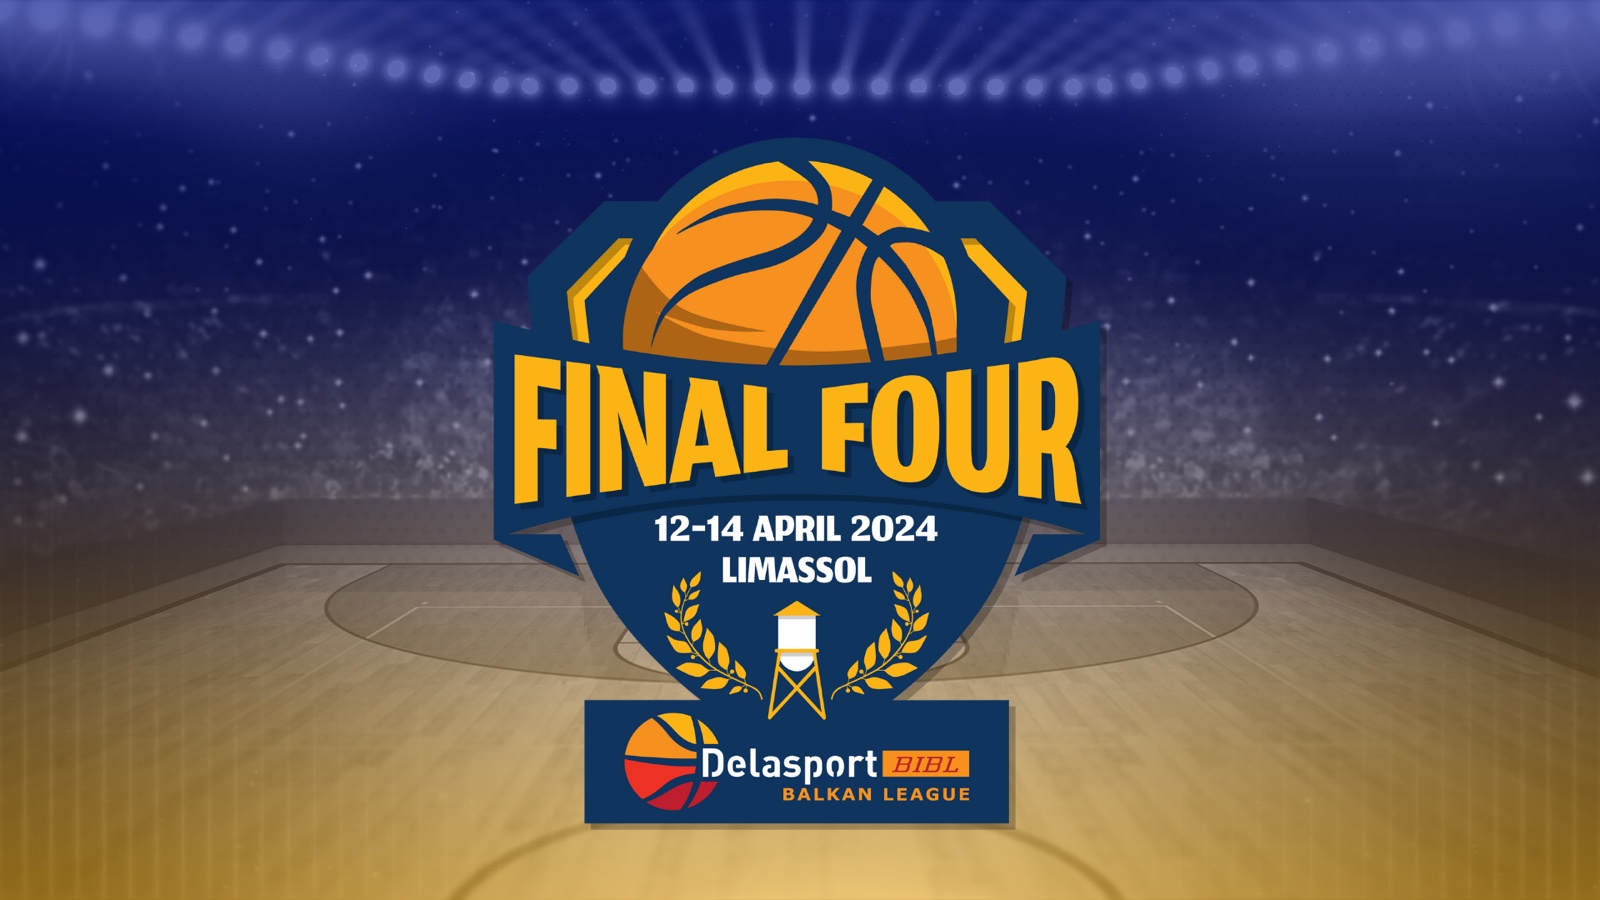 Delasport Balkan League Final 4 to be broadcasted in four countries 